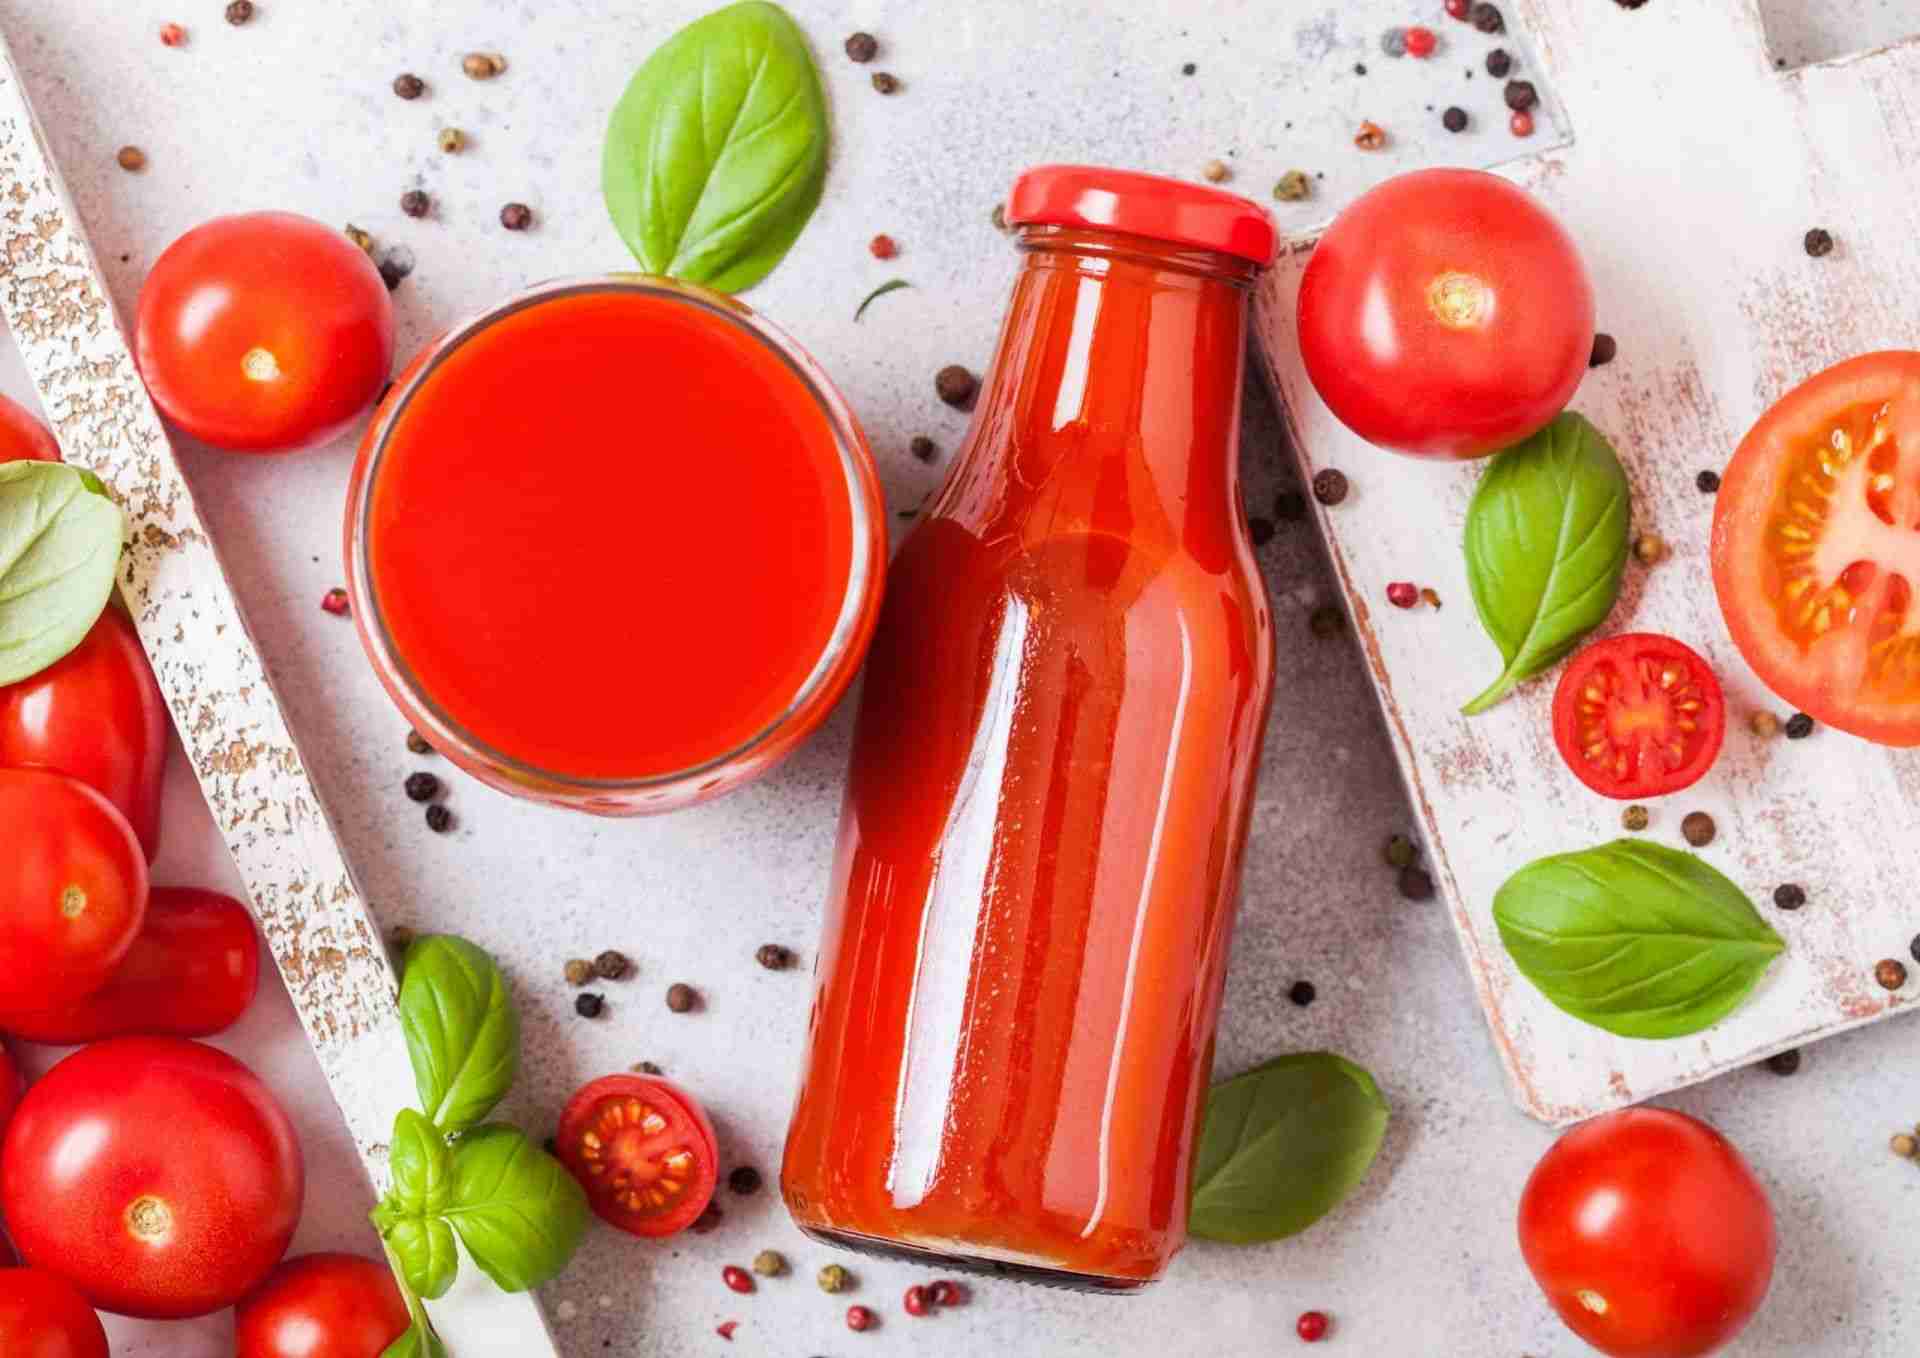 Best Tomato Juicer 2022 - What Do You Need?